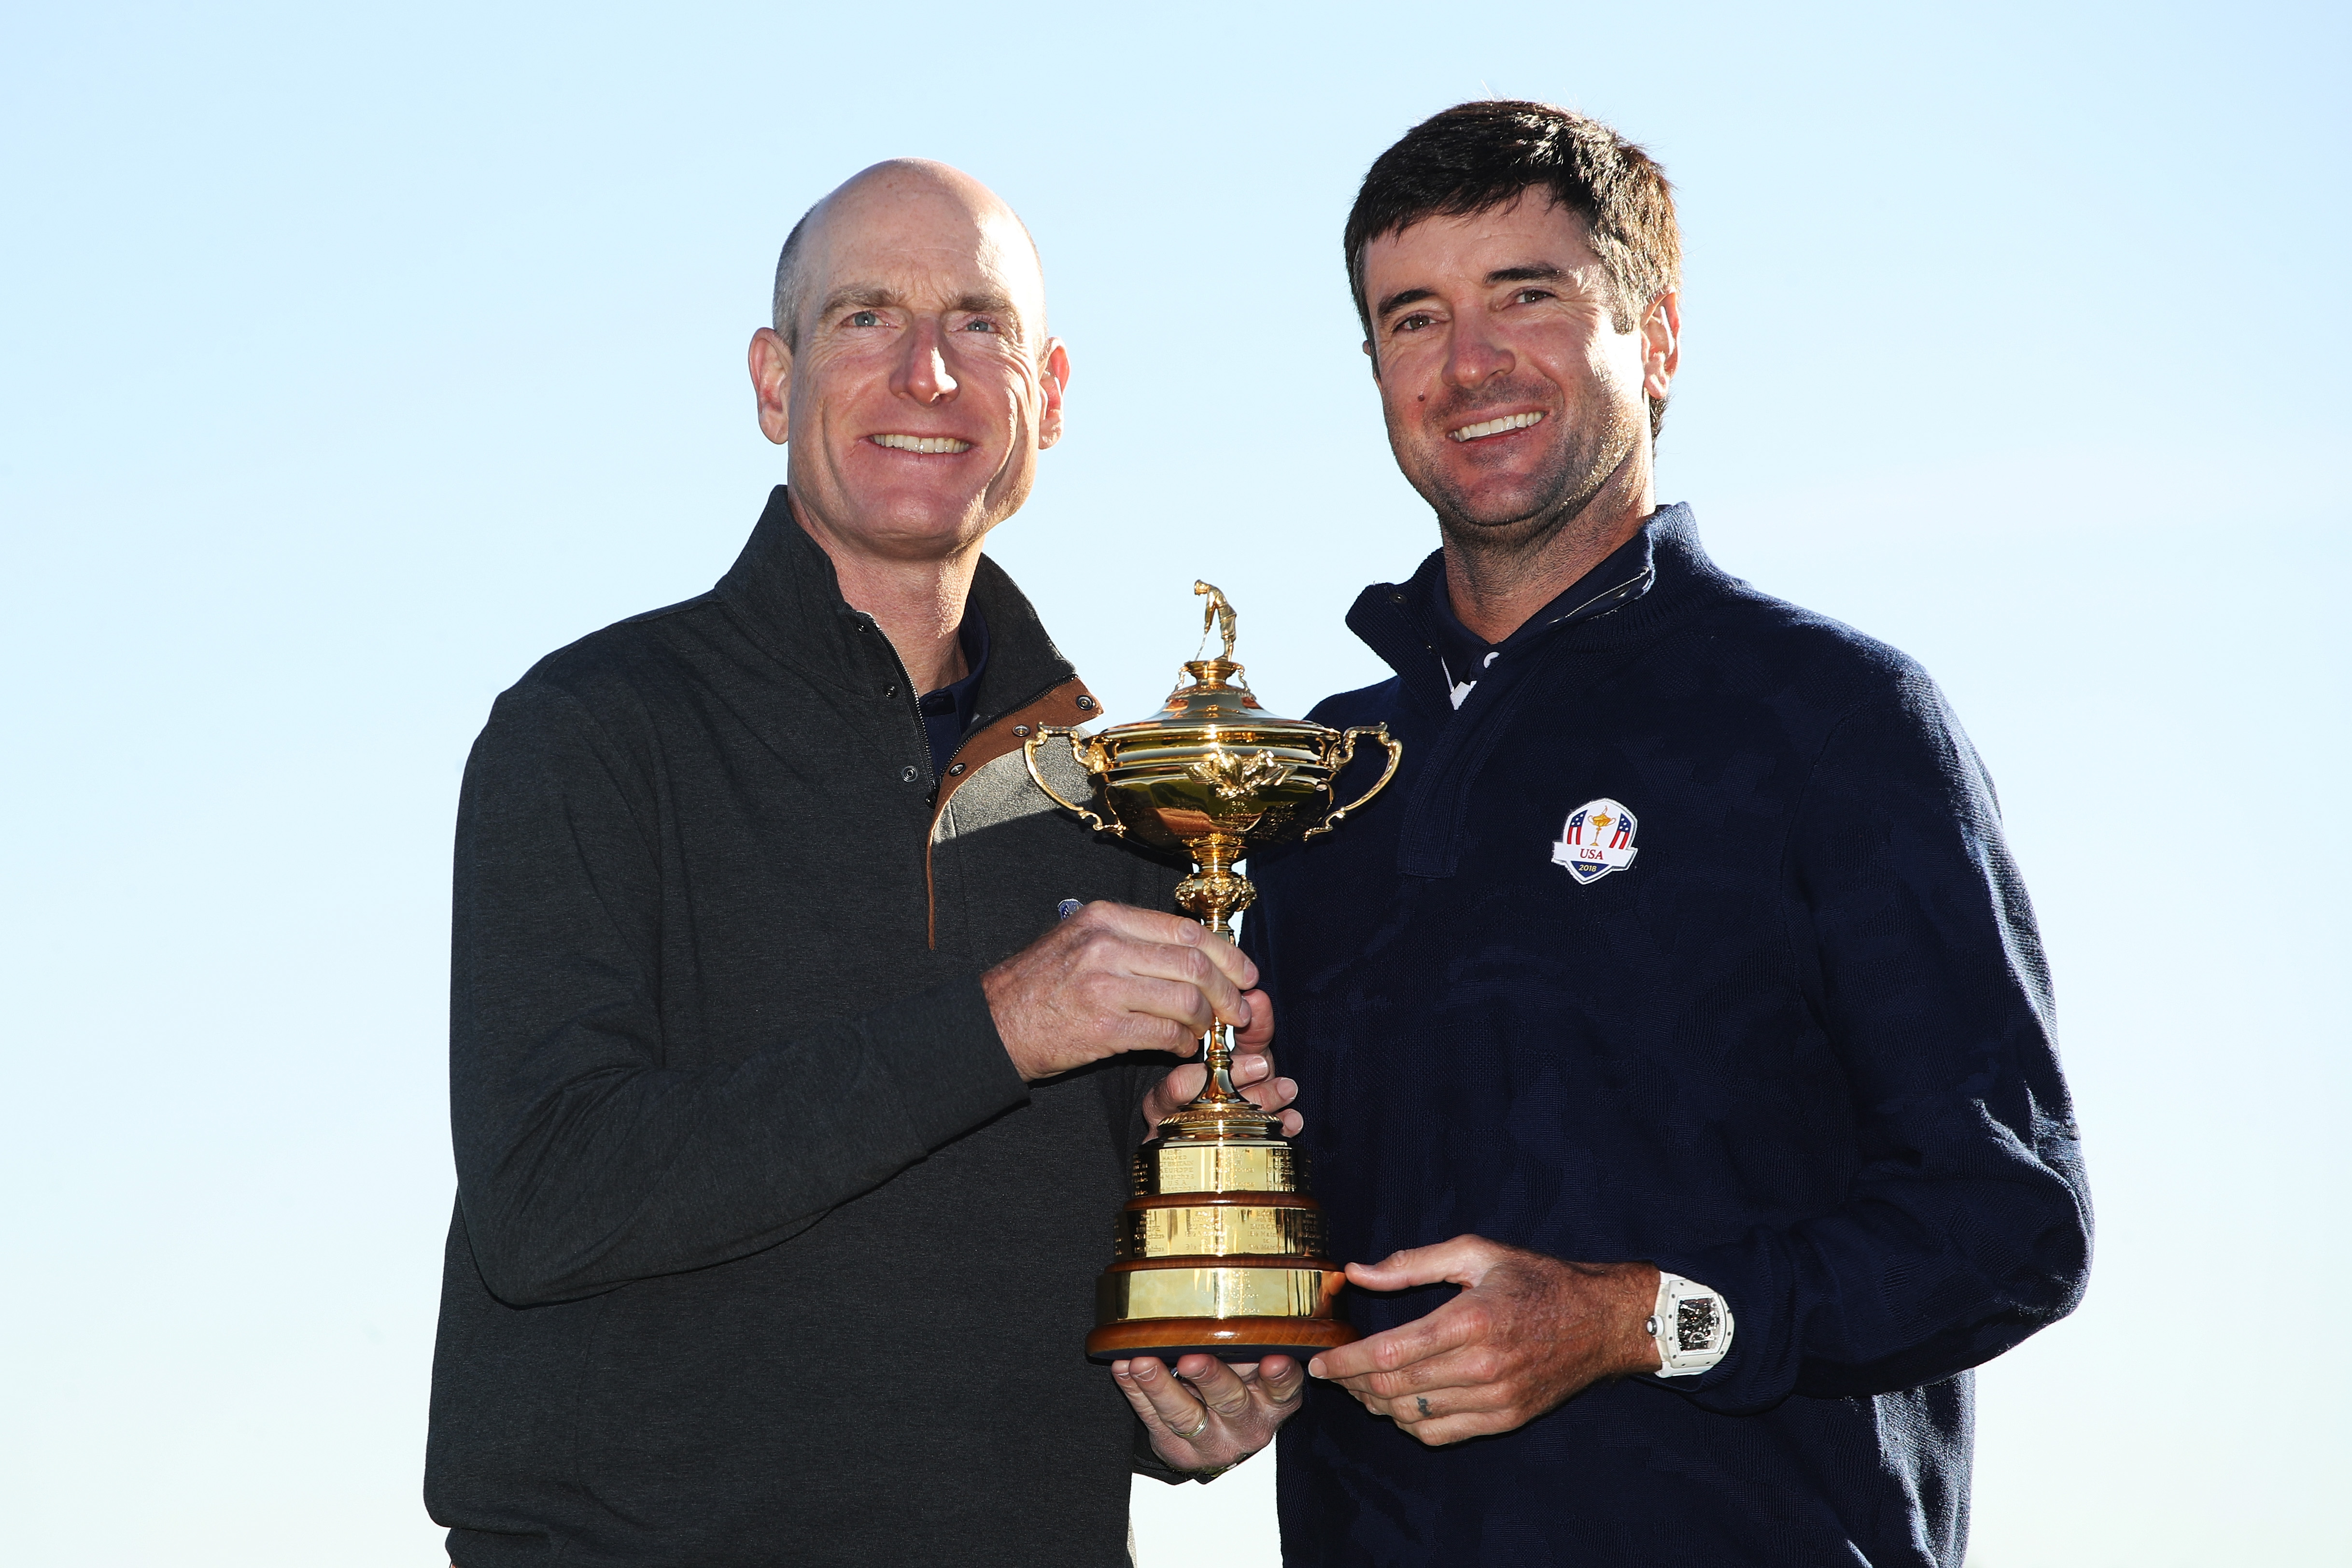 Huge blow for the United States Ryder Cup team as Bubba Watson is ill